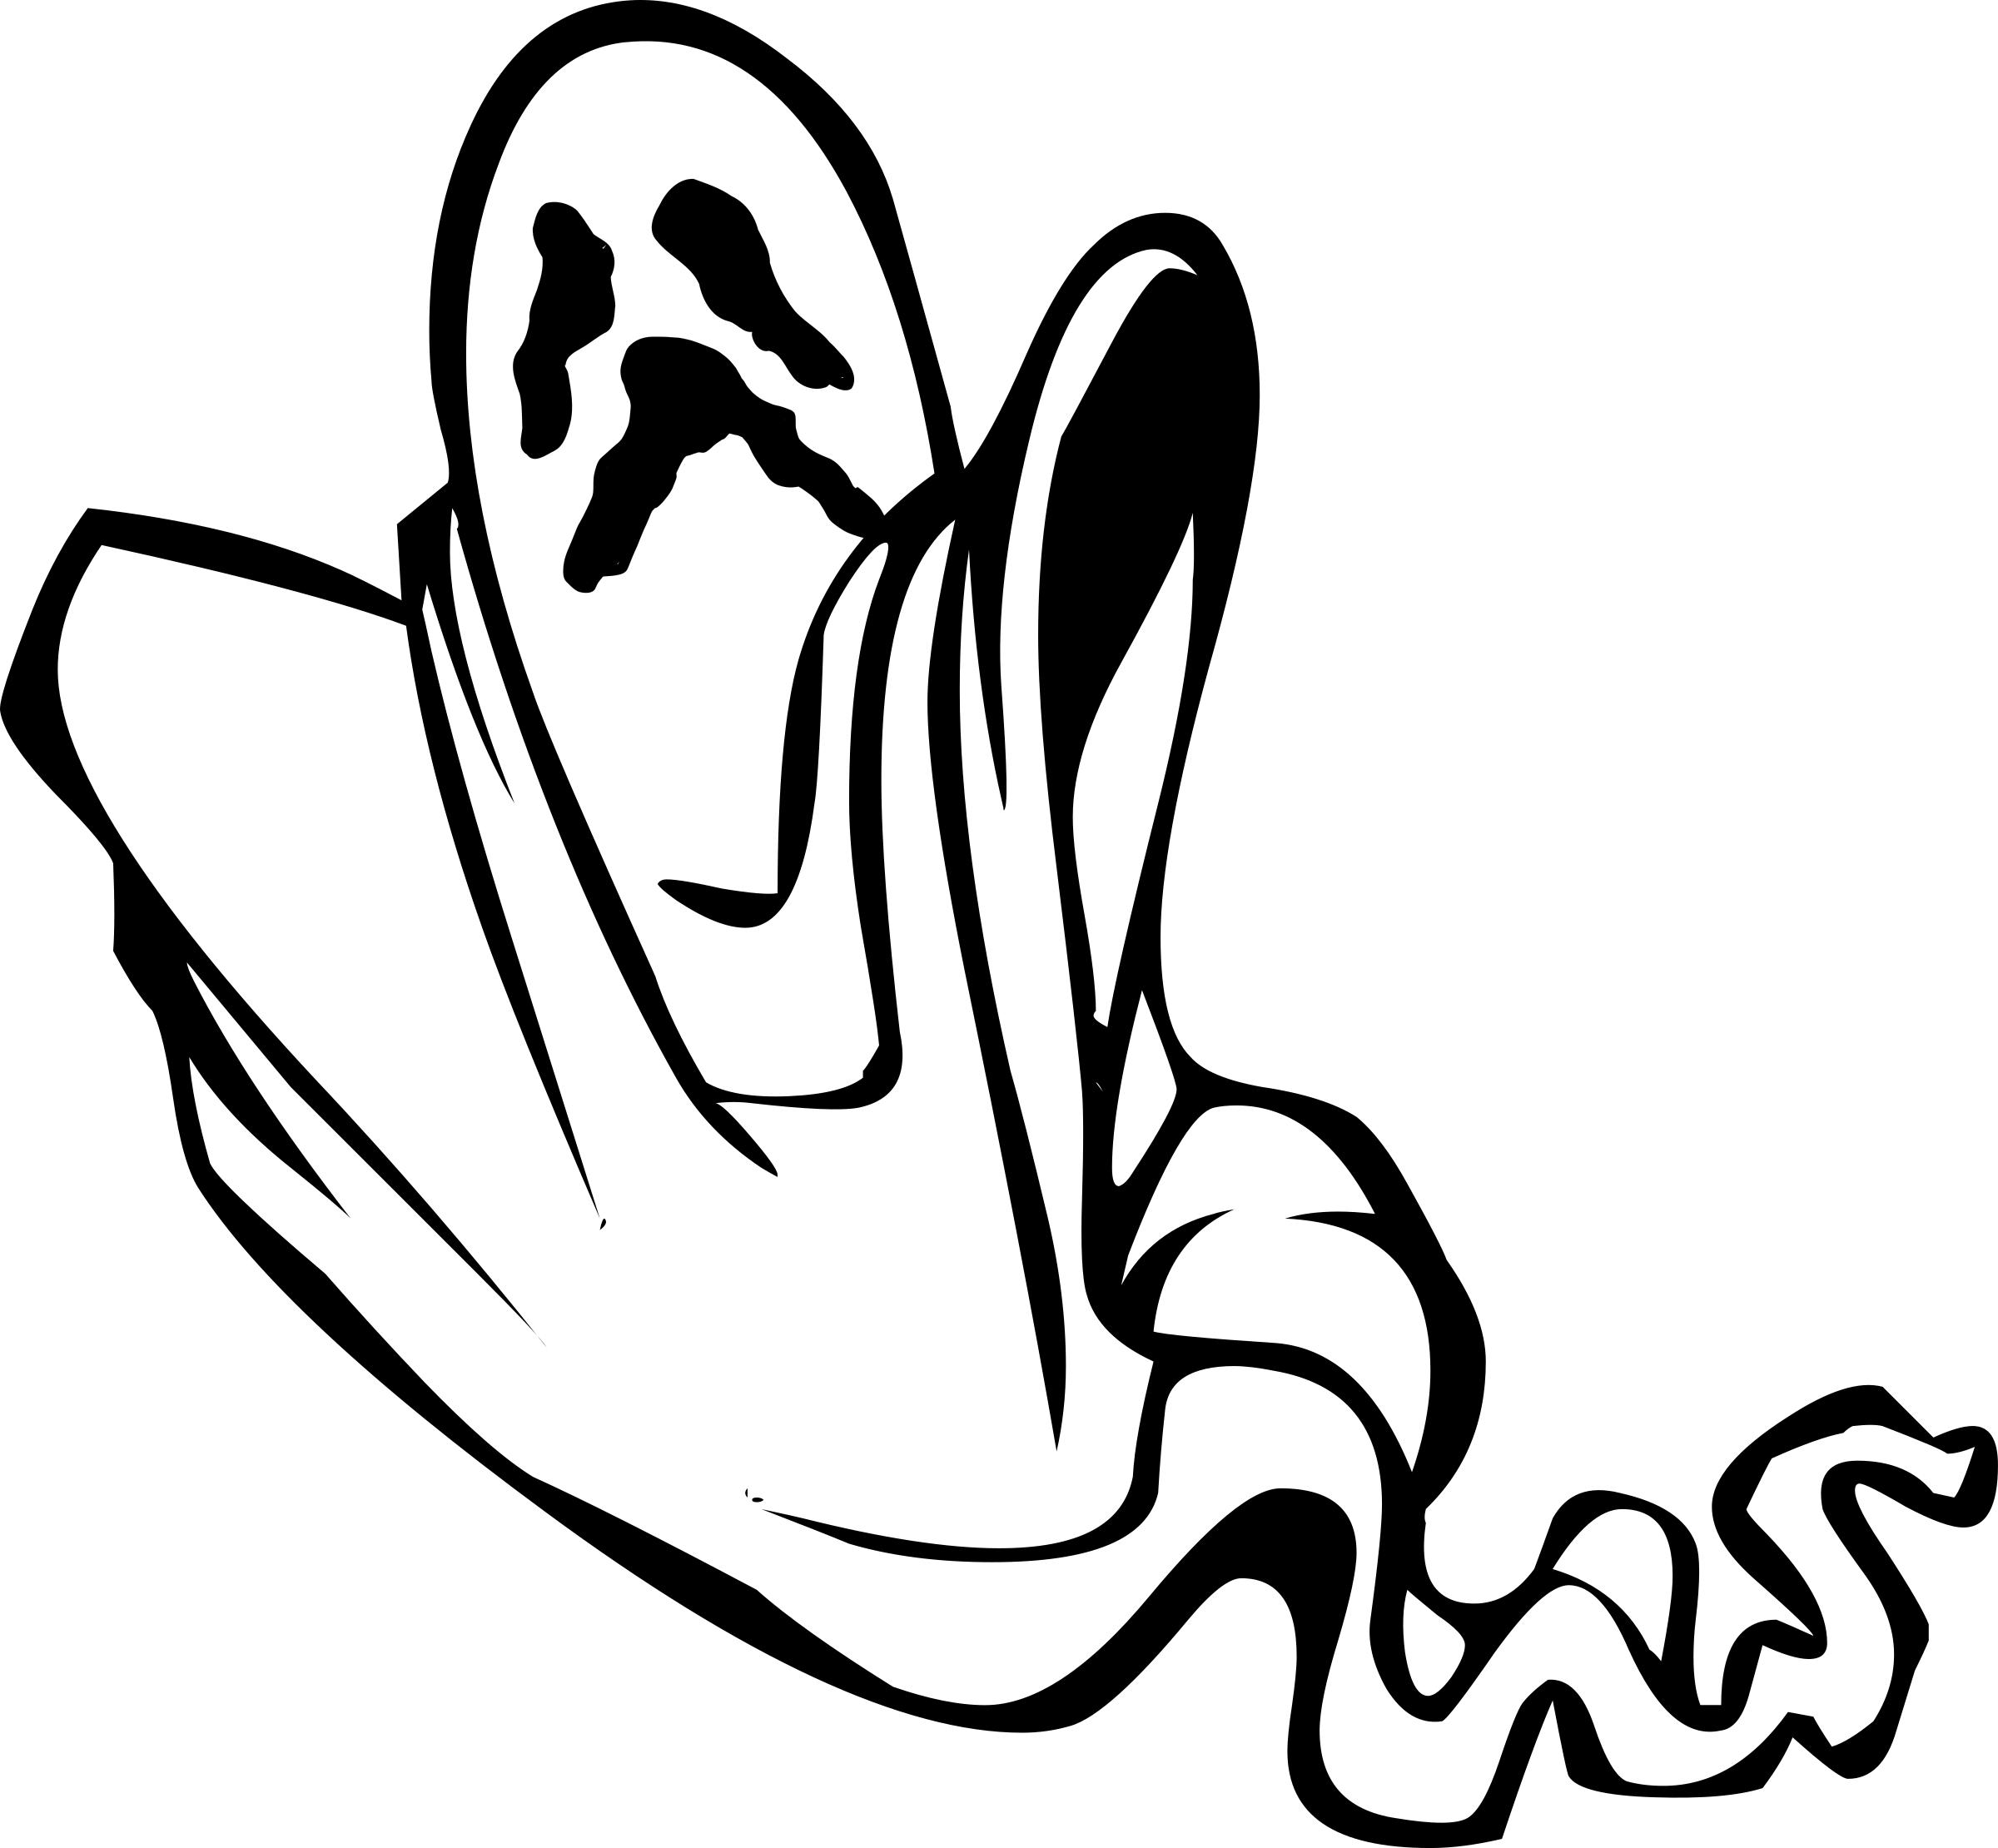 Floating Ghost - Scary png